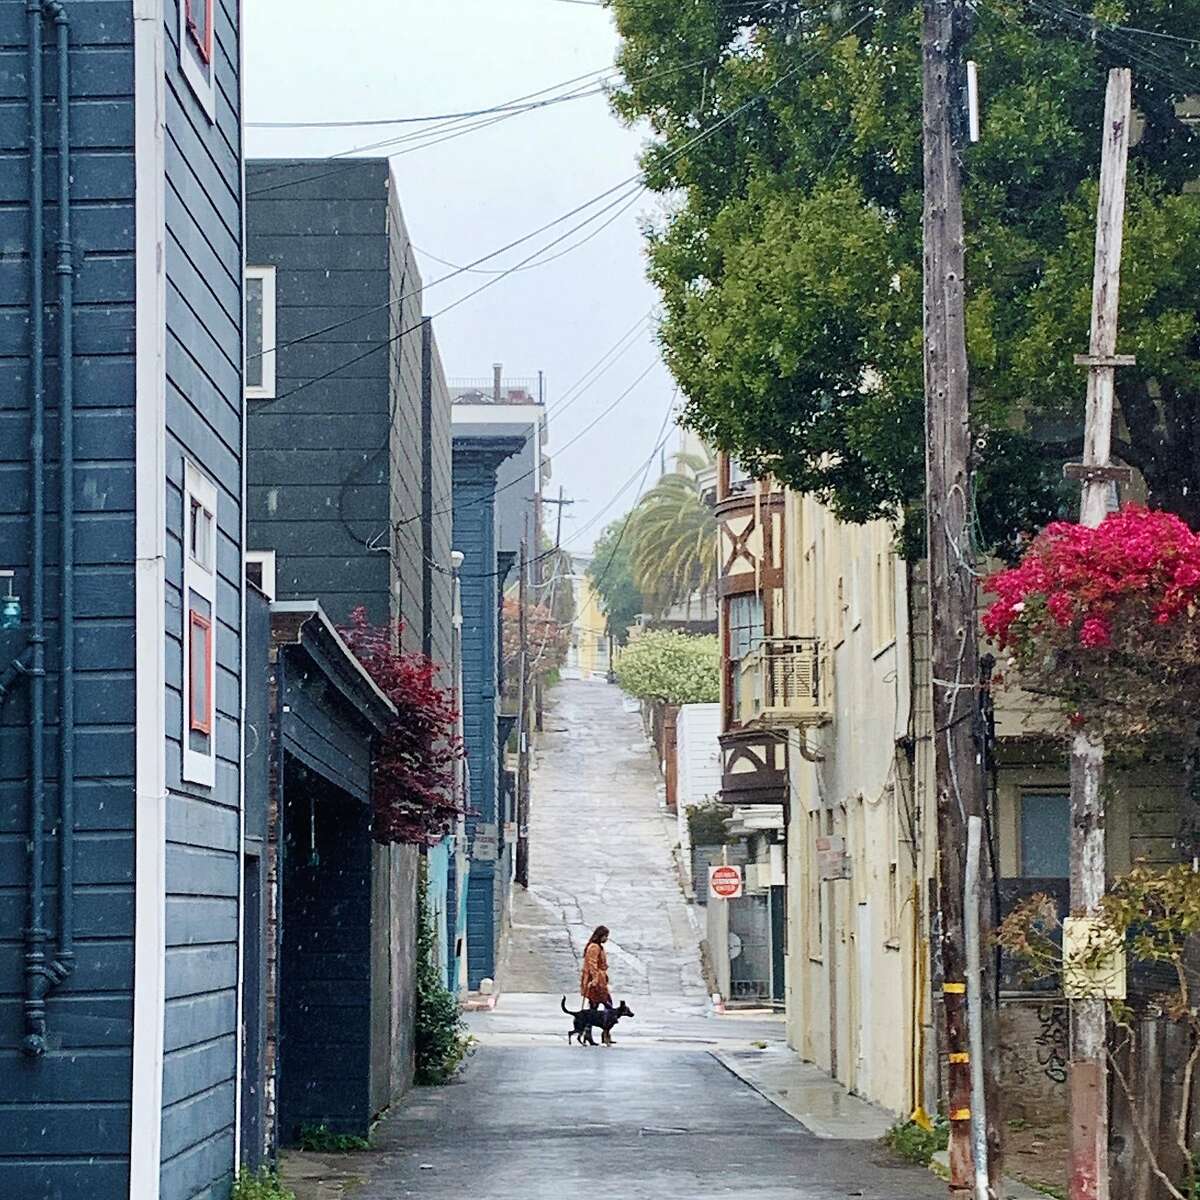 A person and dog walk in light rain in San Francisco’s Mission District on Sunday.